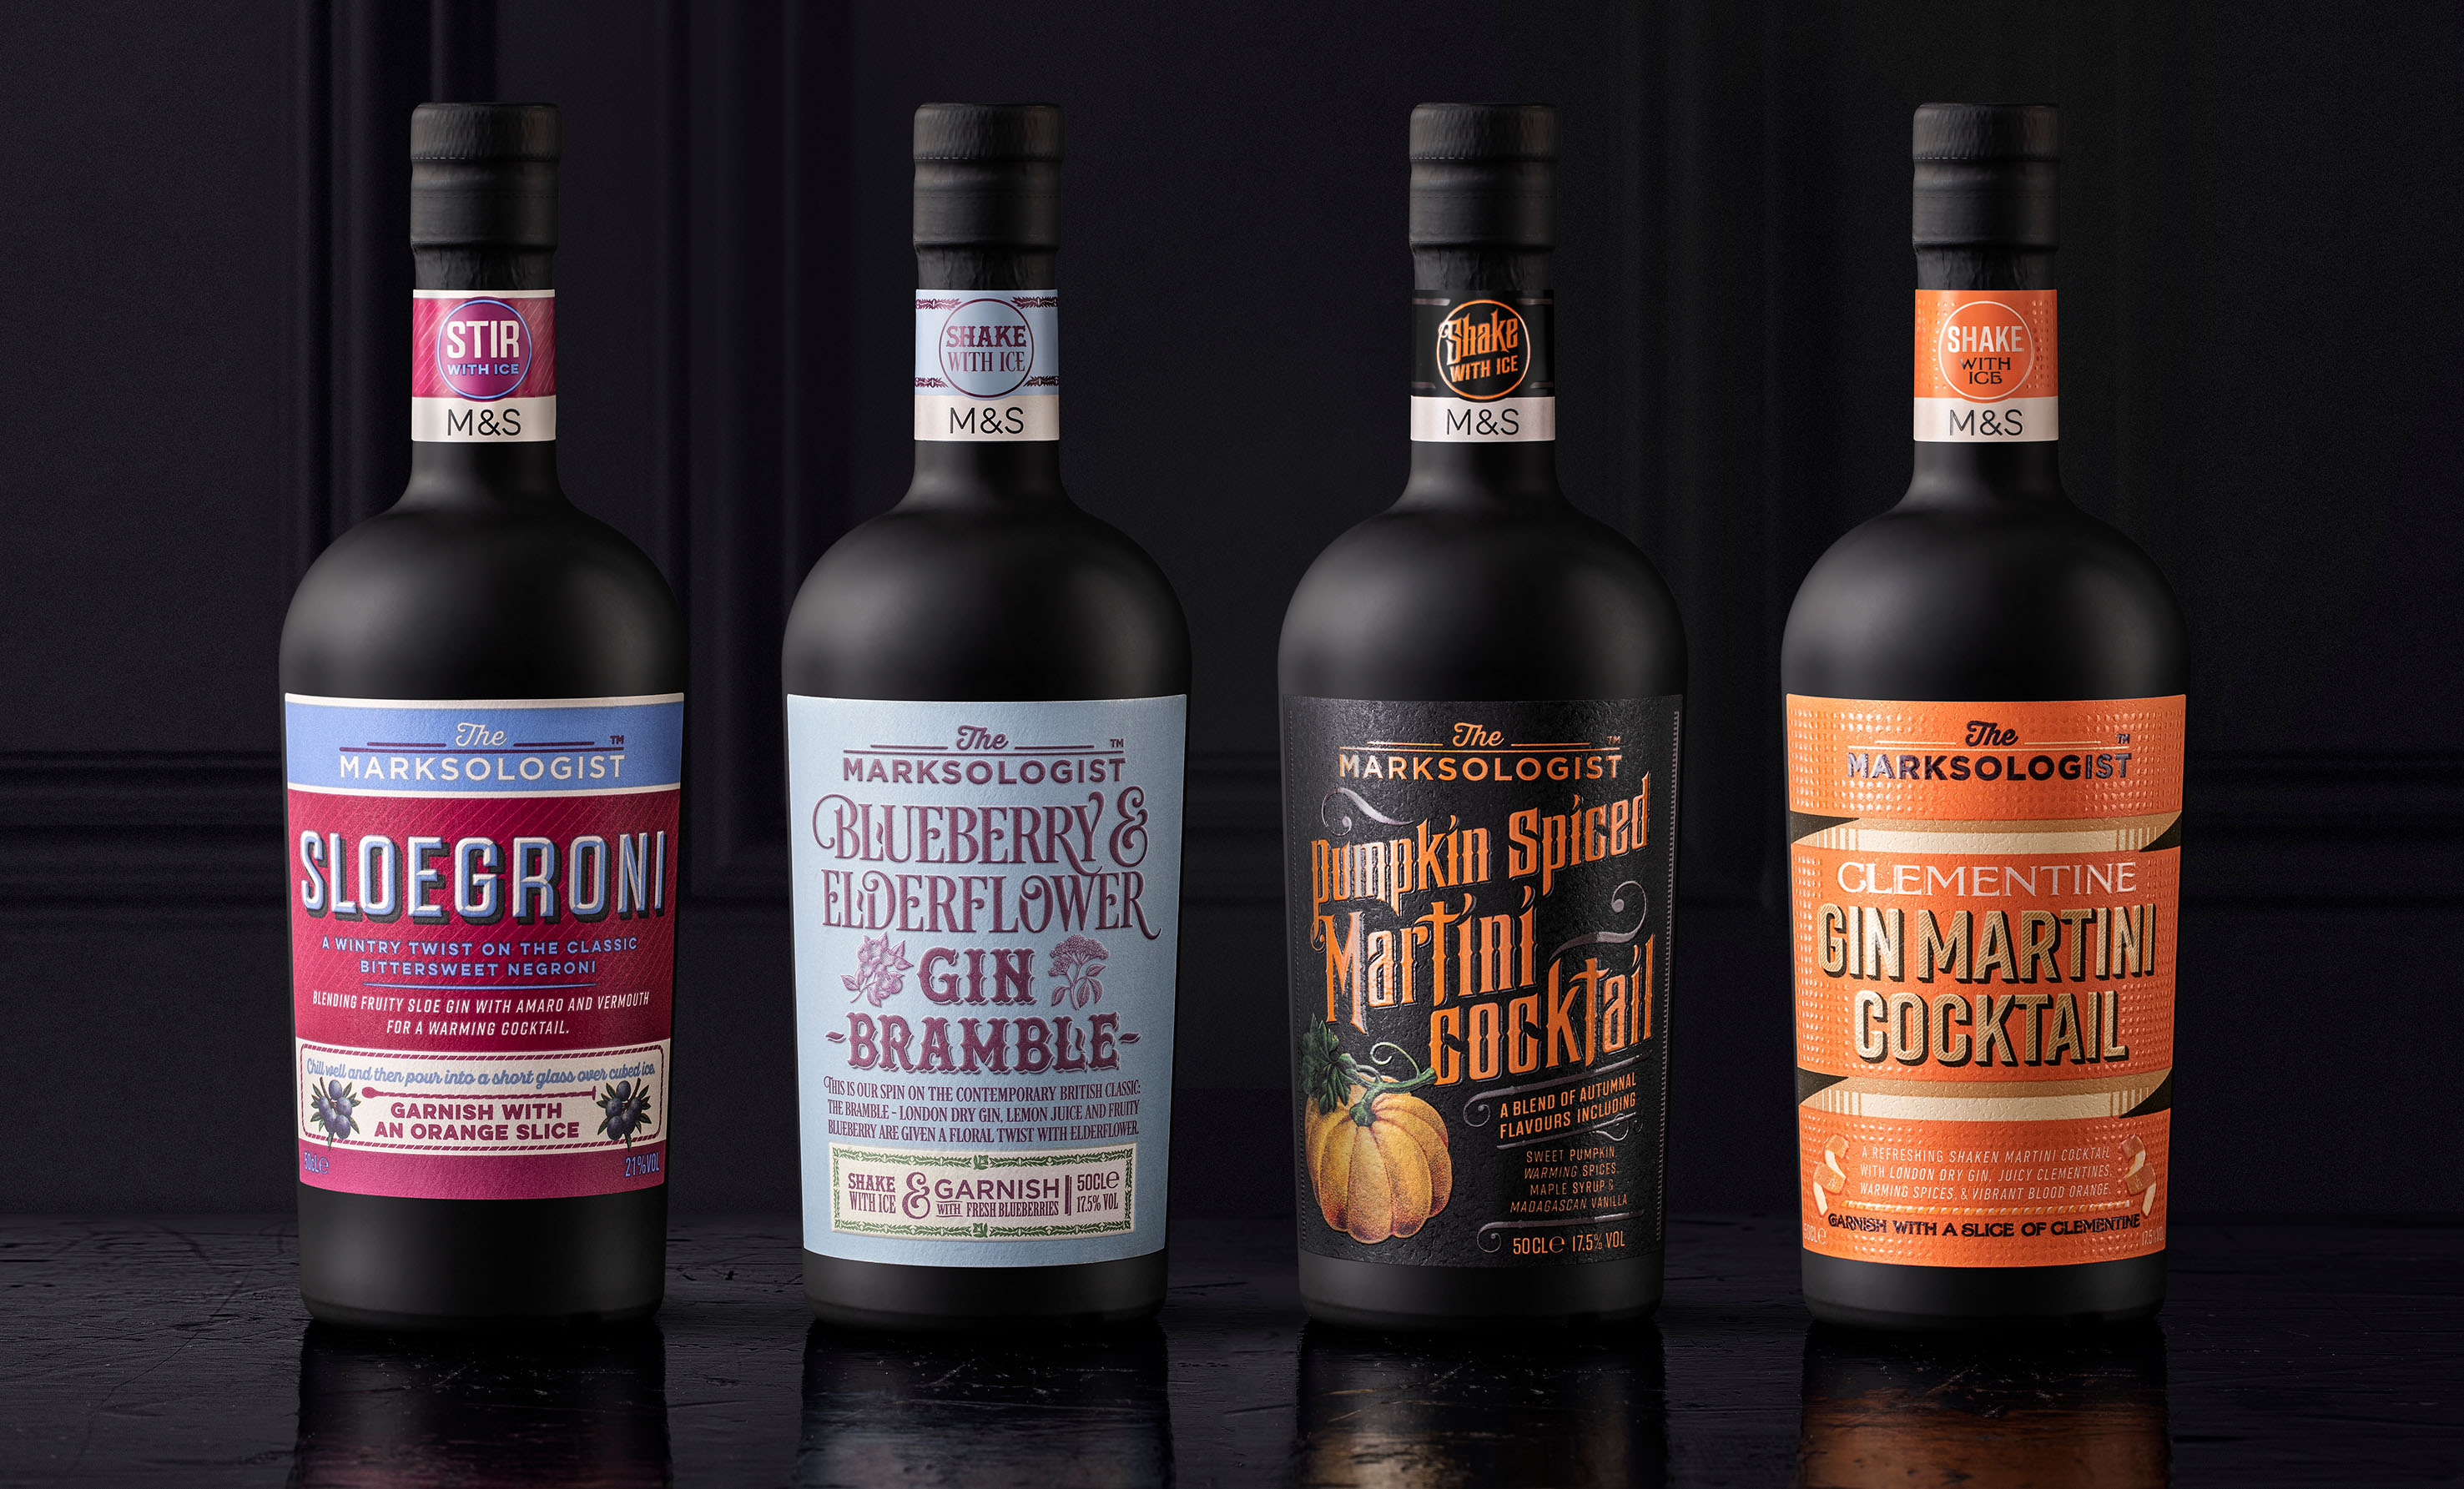 ‘The Marksologist’ Premium Cocktail Range From Marks and Spencer